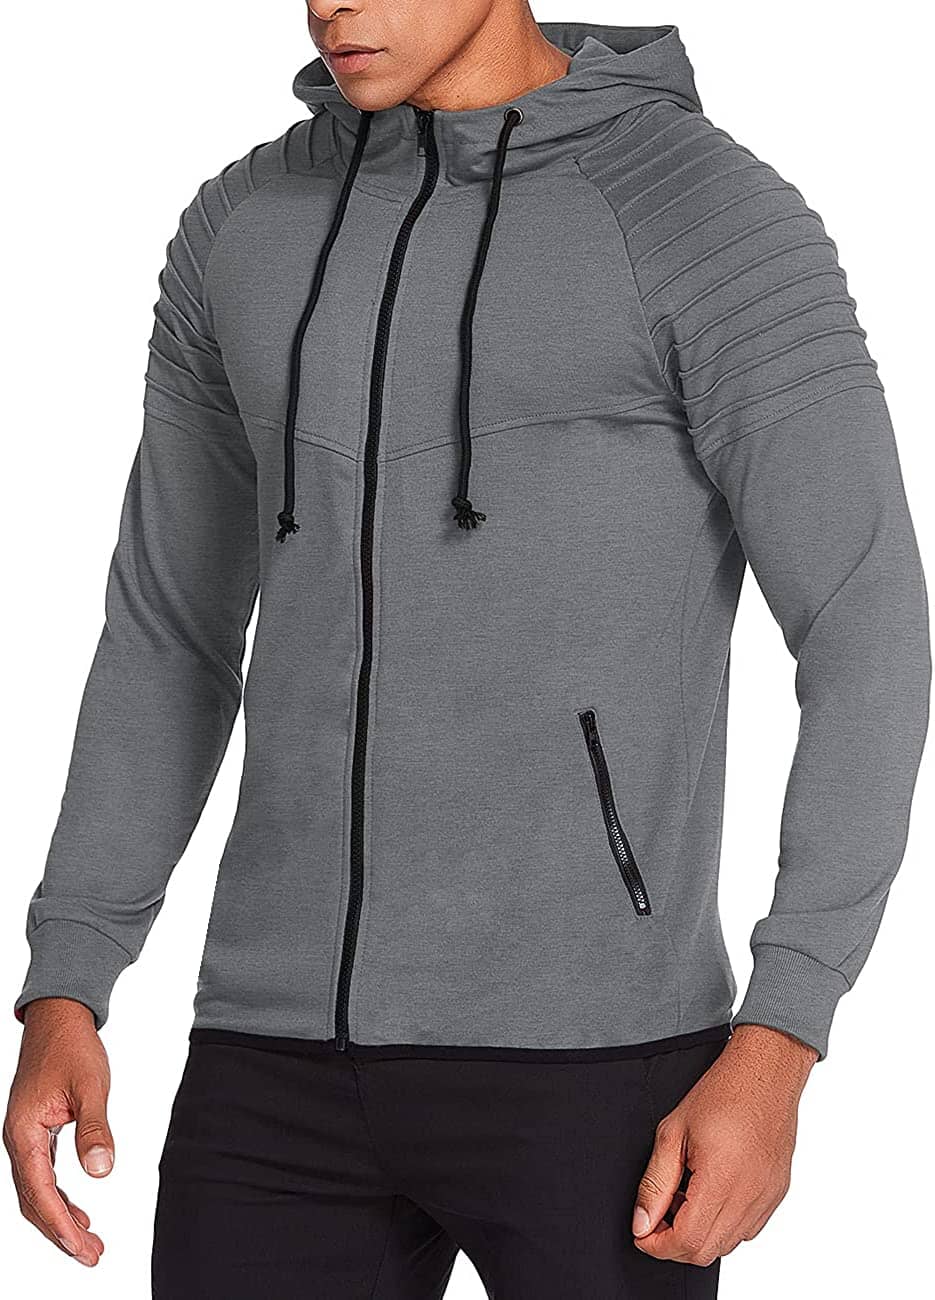 Fashion Long Sleeve Hooded With Zipper Pocket (US Only) Hoodies Coofandy's 01_dark Gray S 